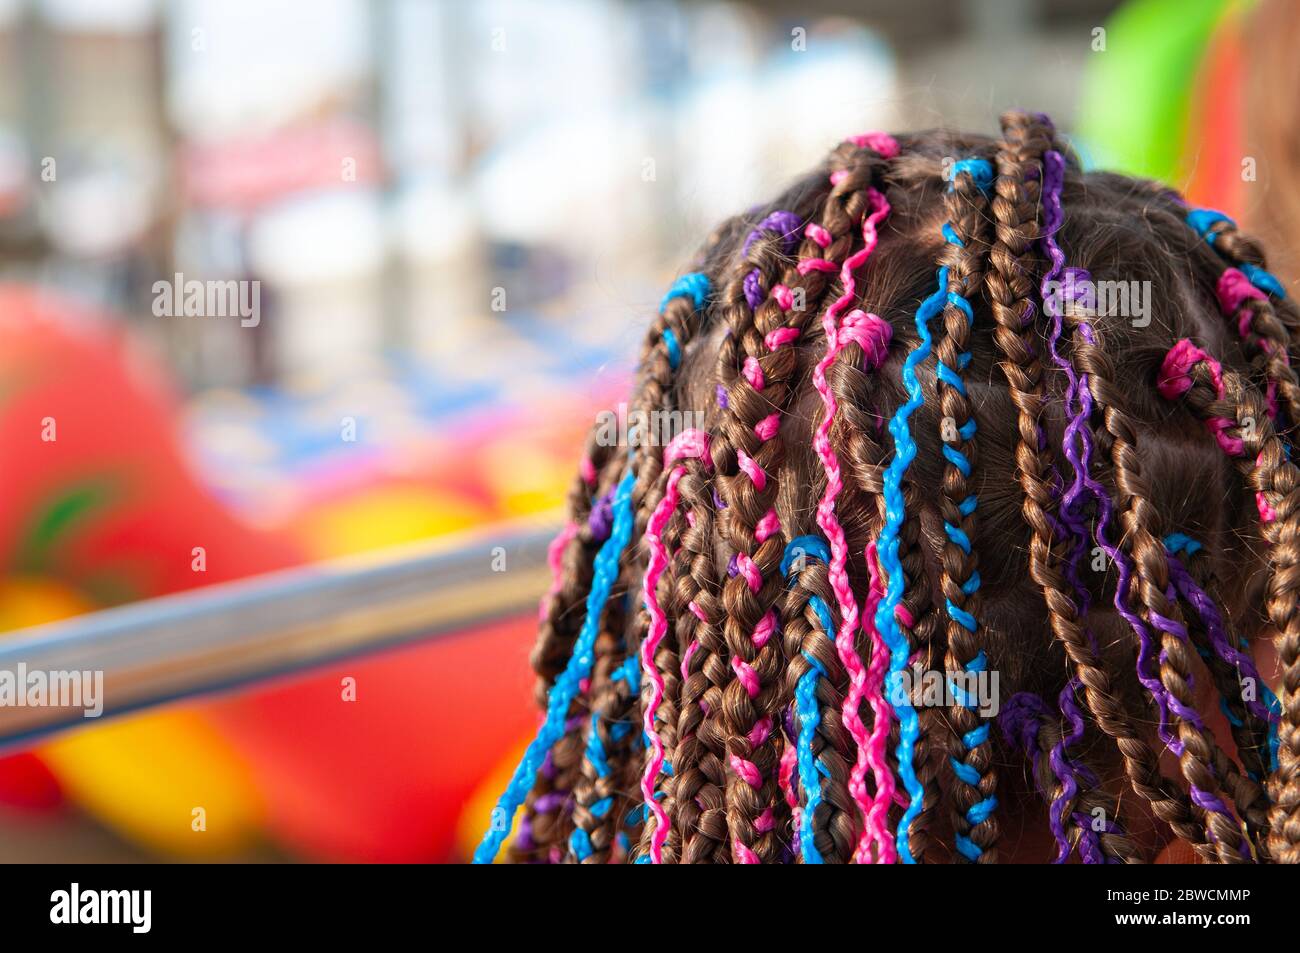 Teen girl's hair with small afro pigtails with bright multicolored ribbons Stock Photo